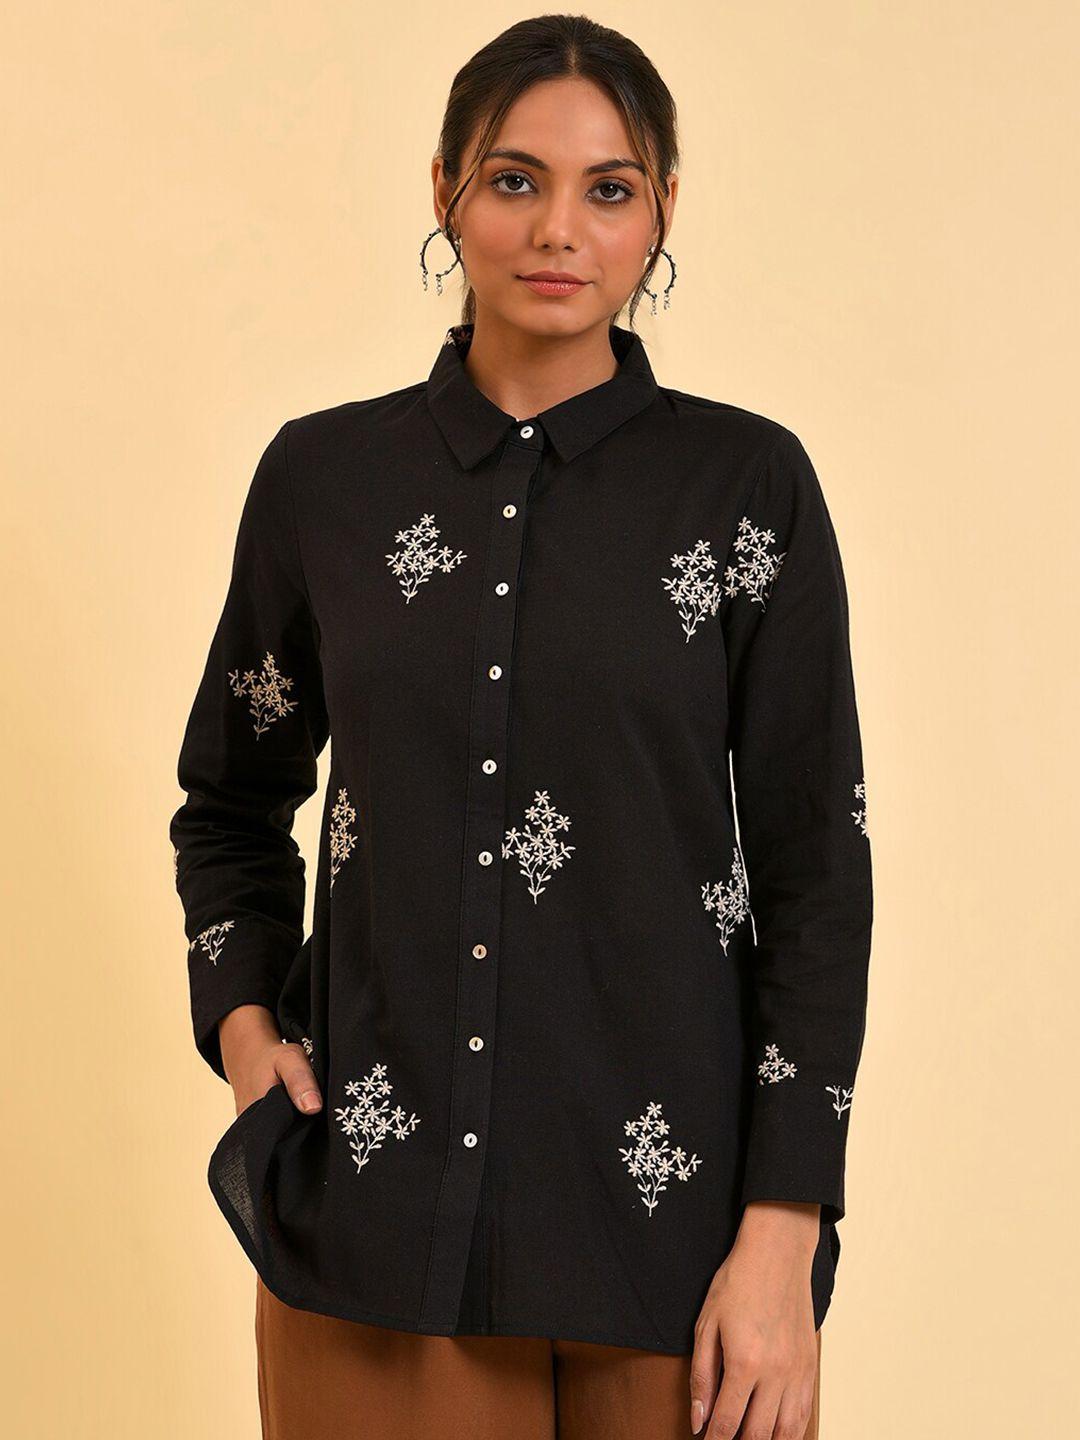 w black floral embroidered cotton linen shirt style top